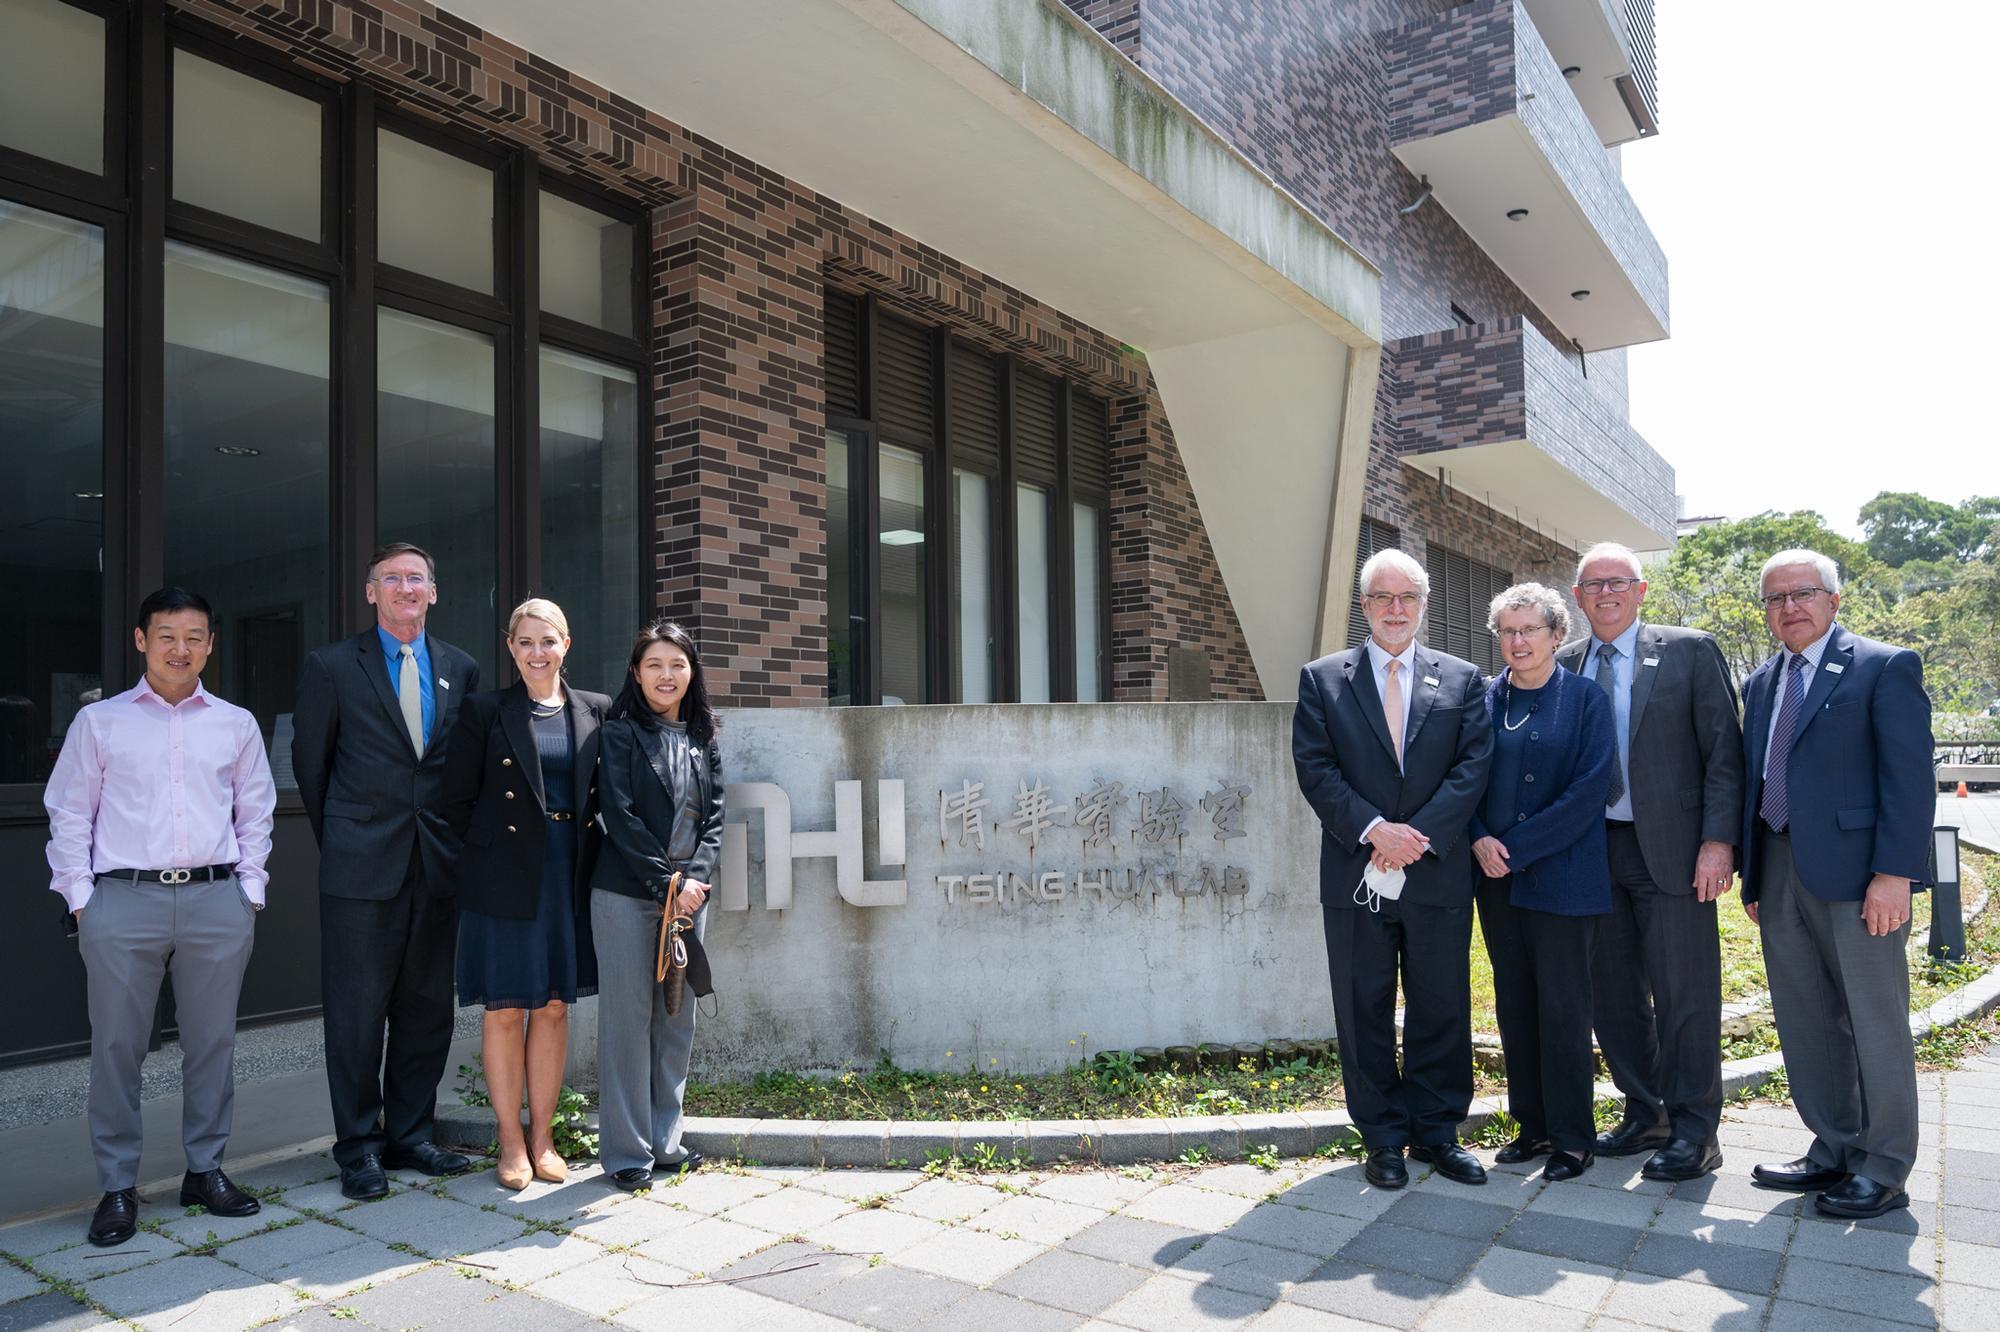 University of Illinois System delegation of 8 people visited Tsing Hua Lab.